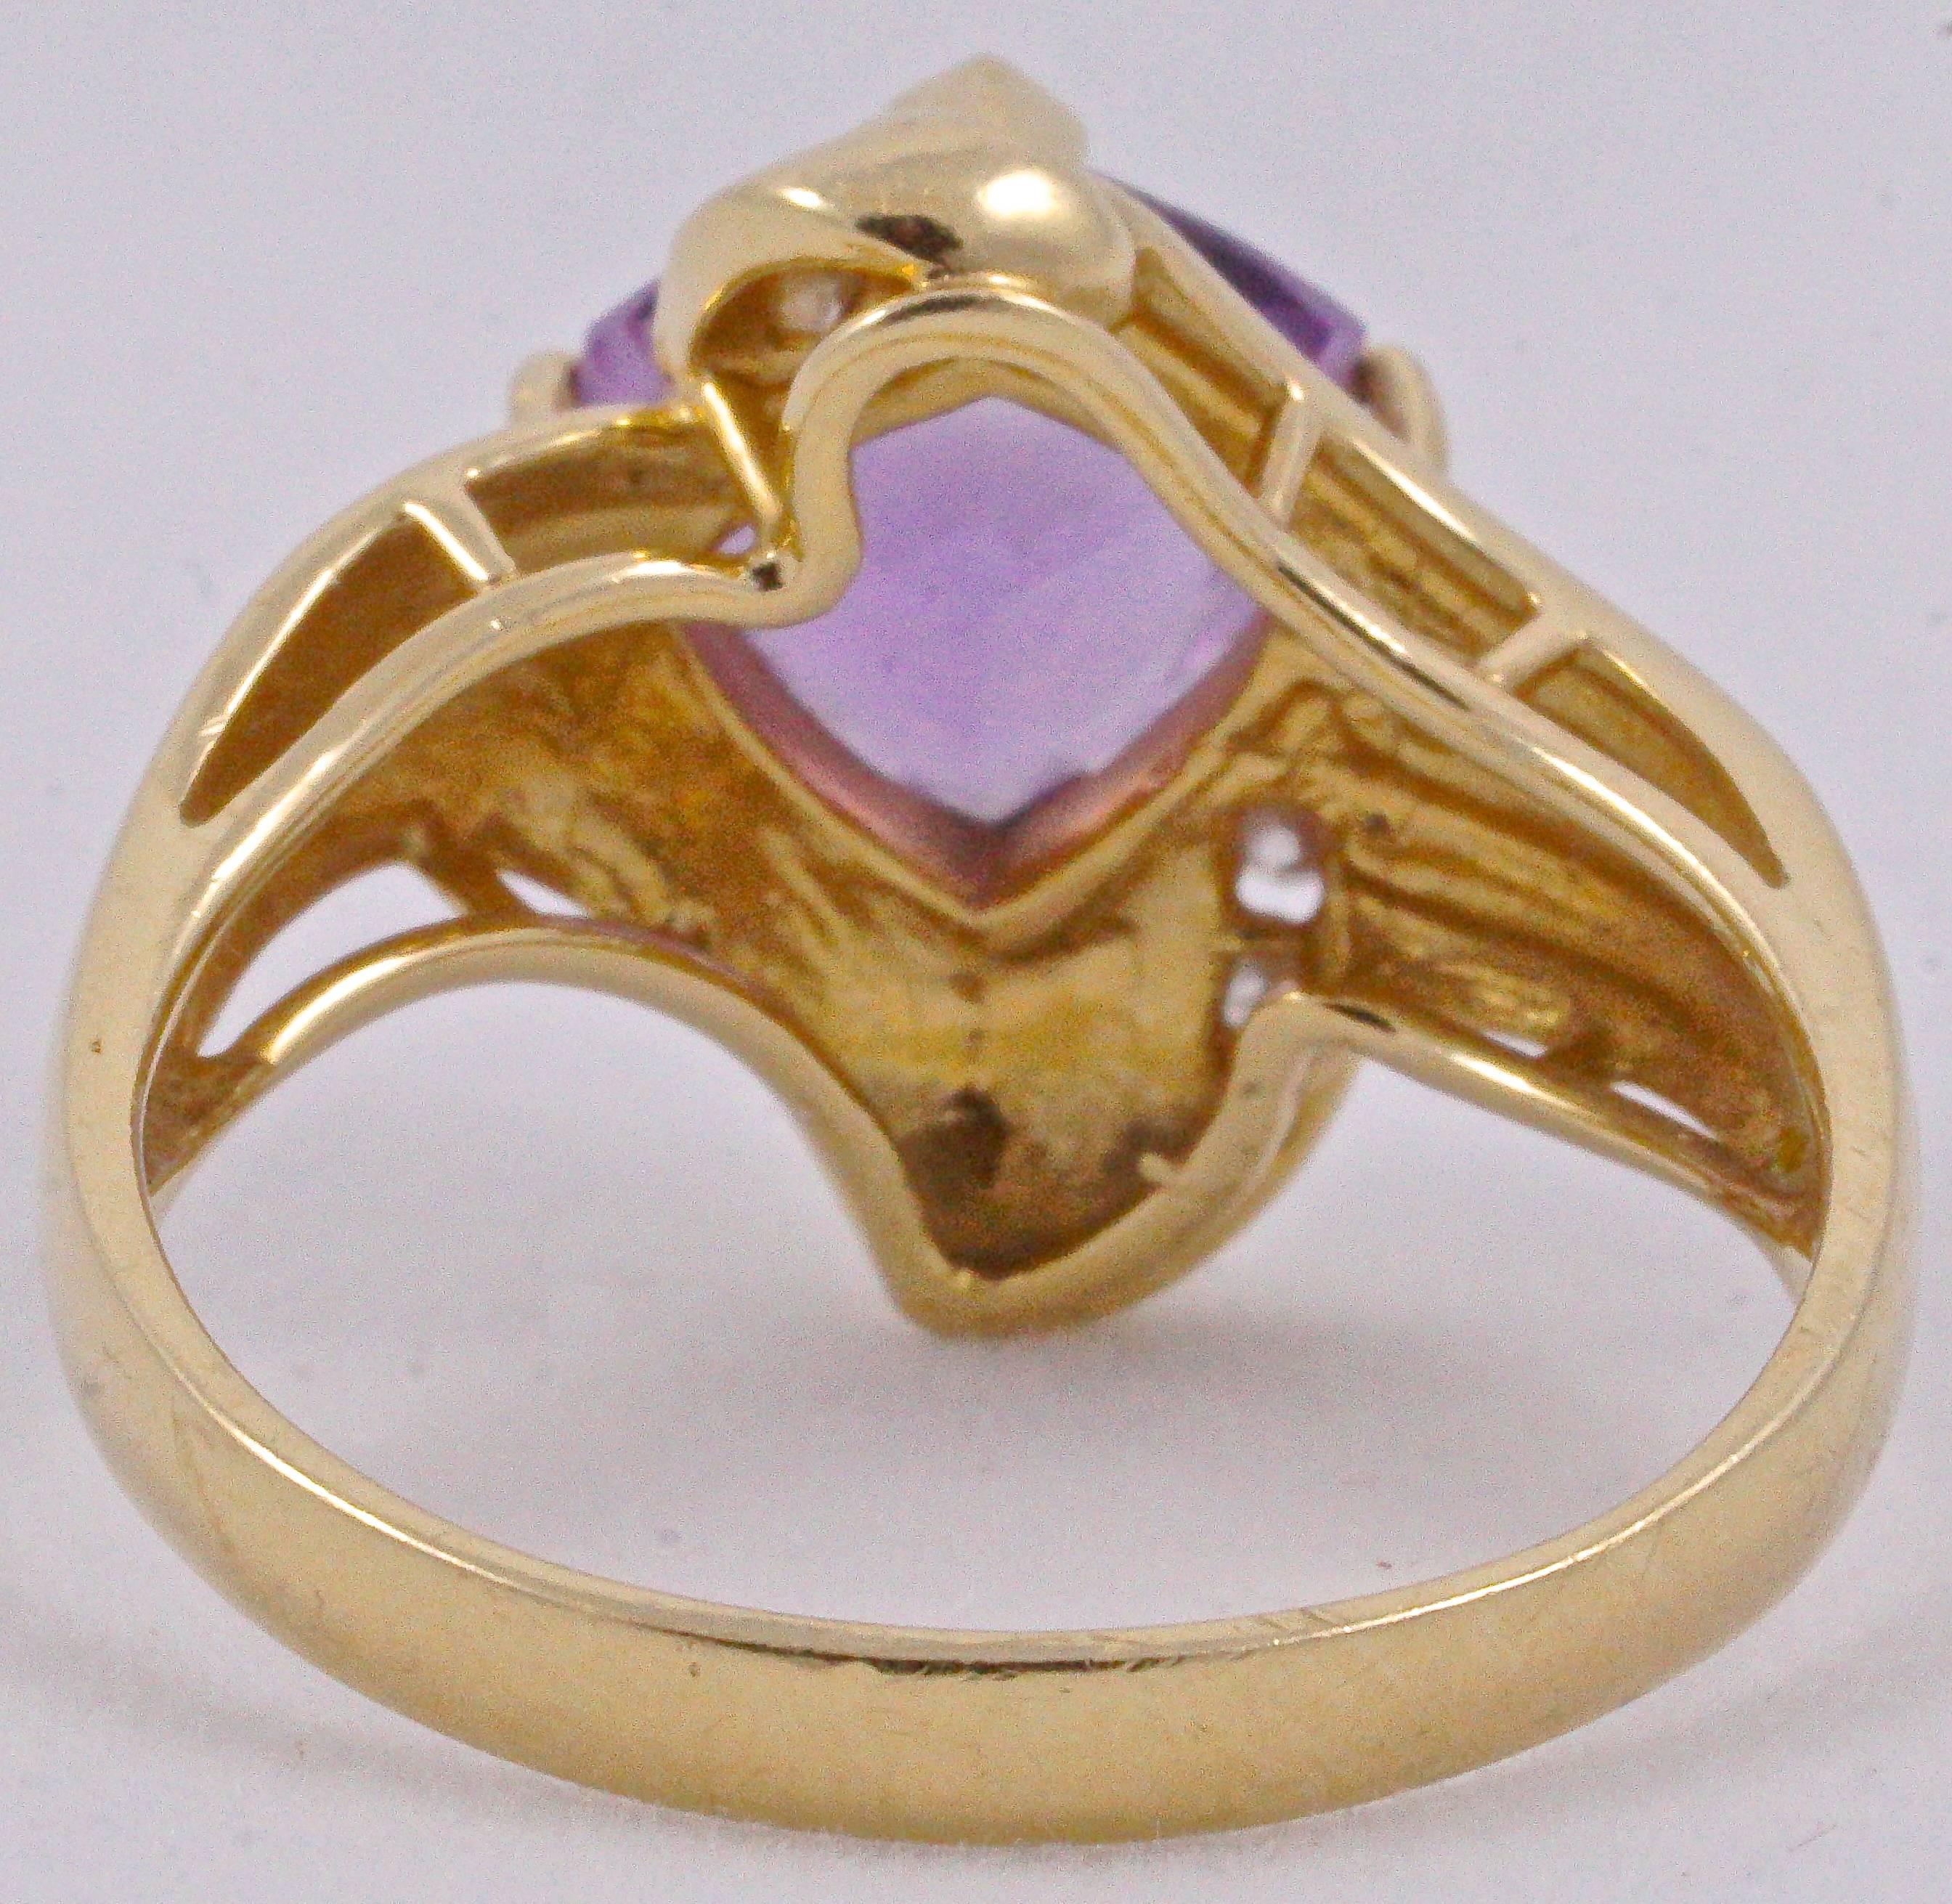 14K gold dress ring with a faceted amethyst and four channel set diamonds, stamped J&C, 14KP.  The setting is plain and shiny on one side, and has a ridged pattern on the other. Ring size UK O 1/2, US 7 1/4, inside diameter 1.9cm / .75 inch. The